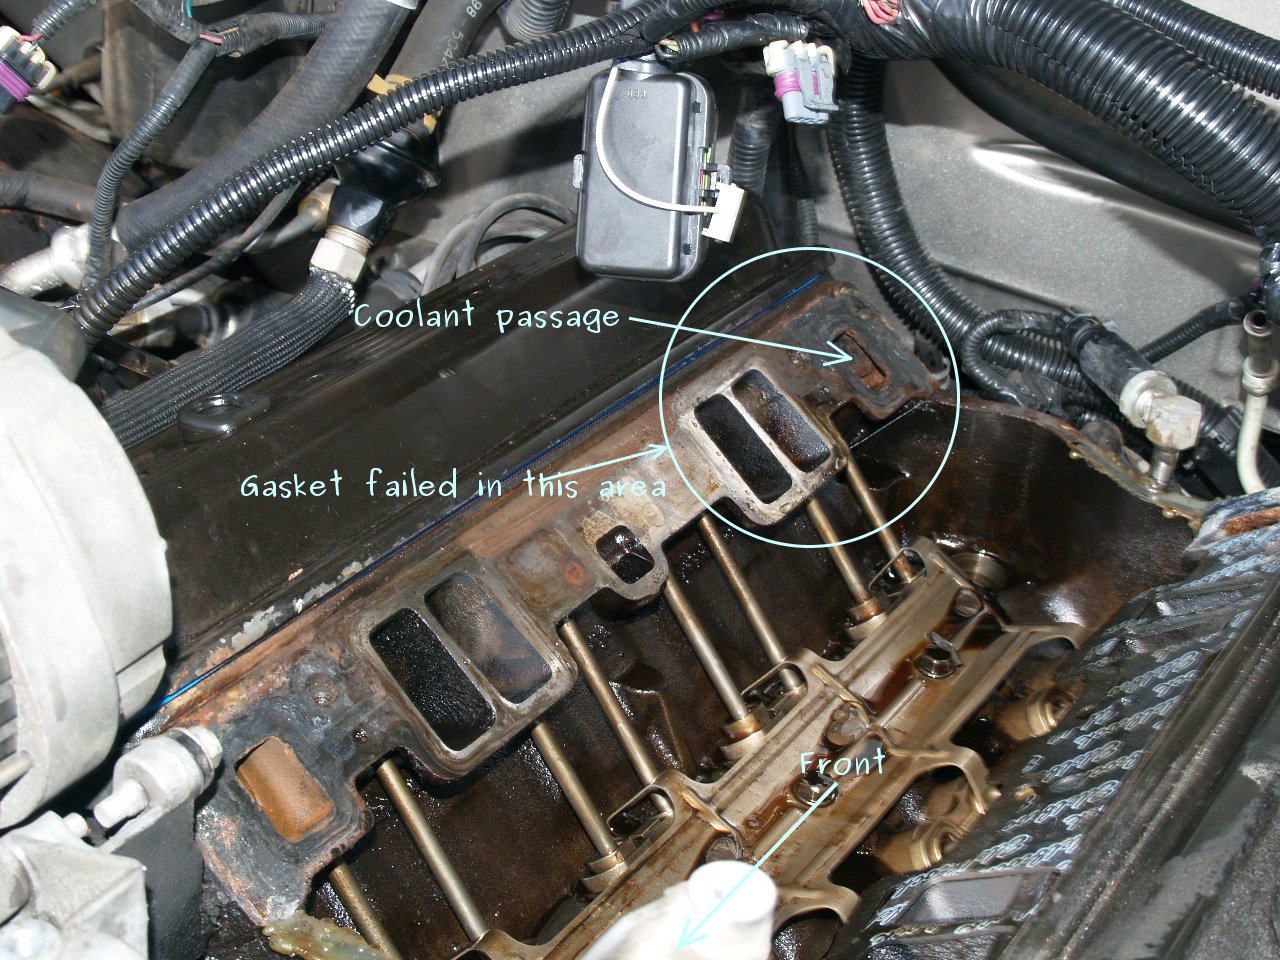 See P0CB6 in engine